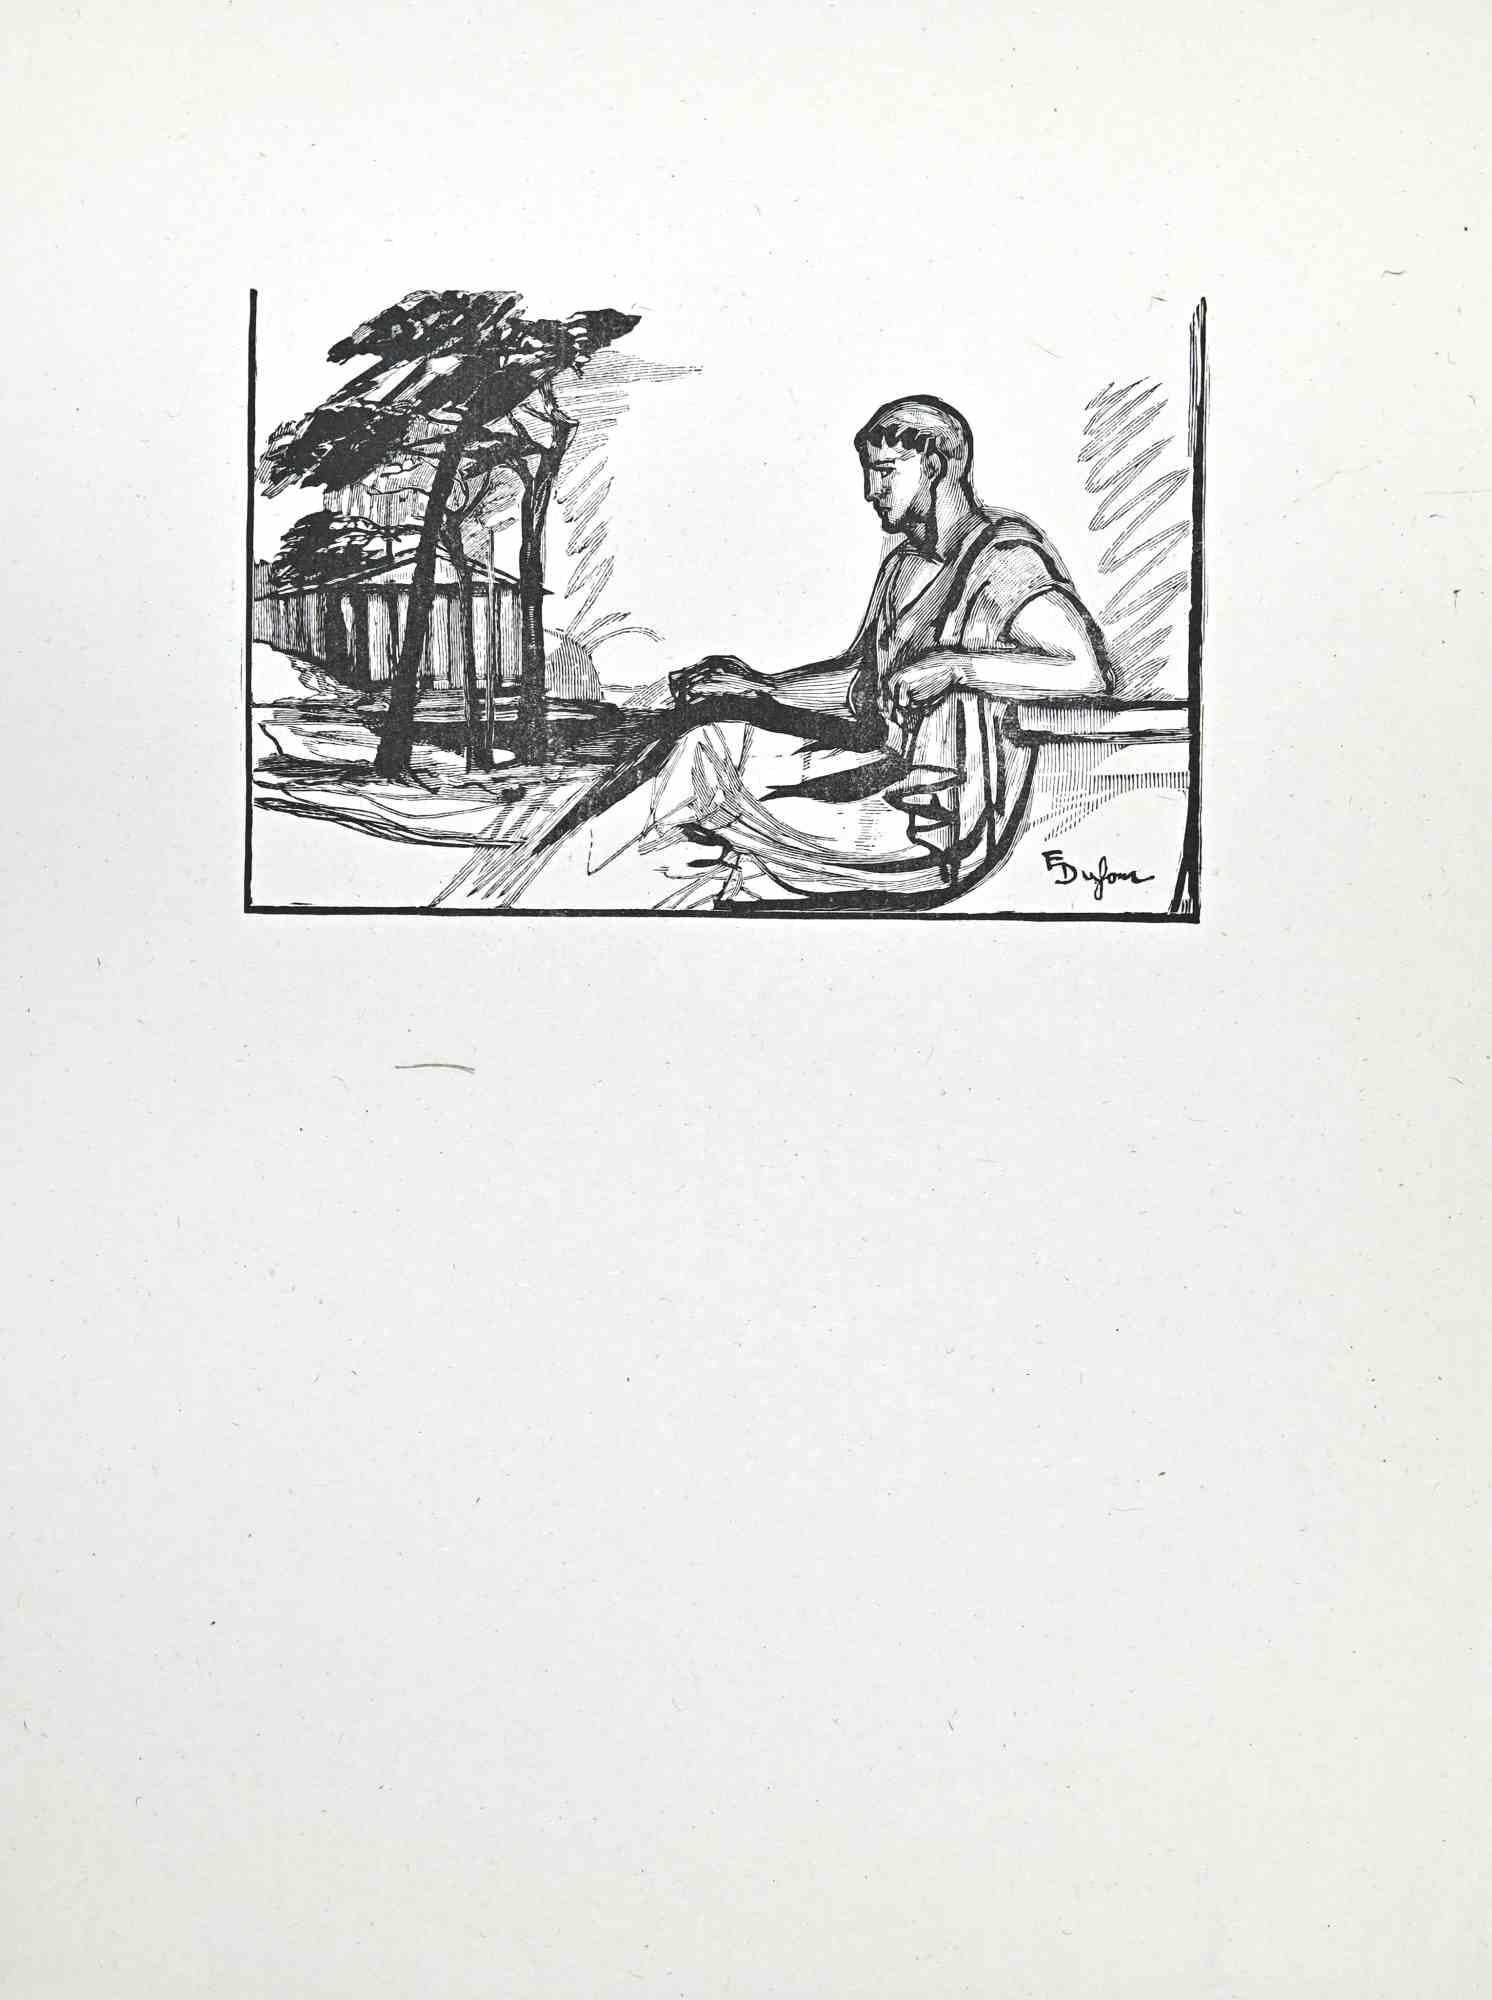 Roman in Ancient Temple is an original woodcut print on ivory-colored paper realized by Paul Baudier (1881-1962) in the 1930s.

Good conditions.

Paul Baudier, (born October 18, 1881 in Paris and died December 9, 1962 in Châtillon), was a French